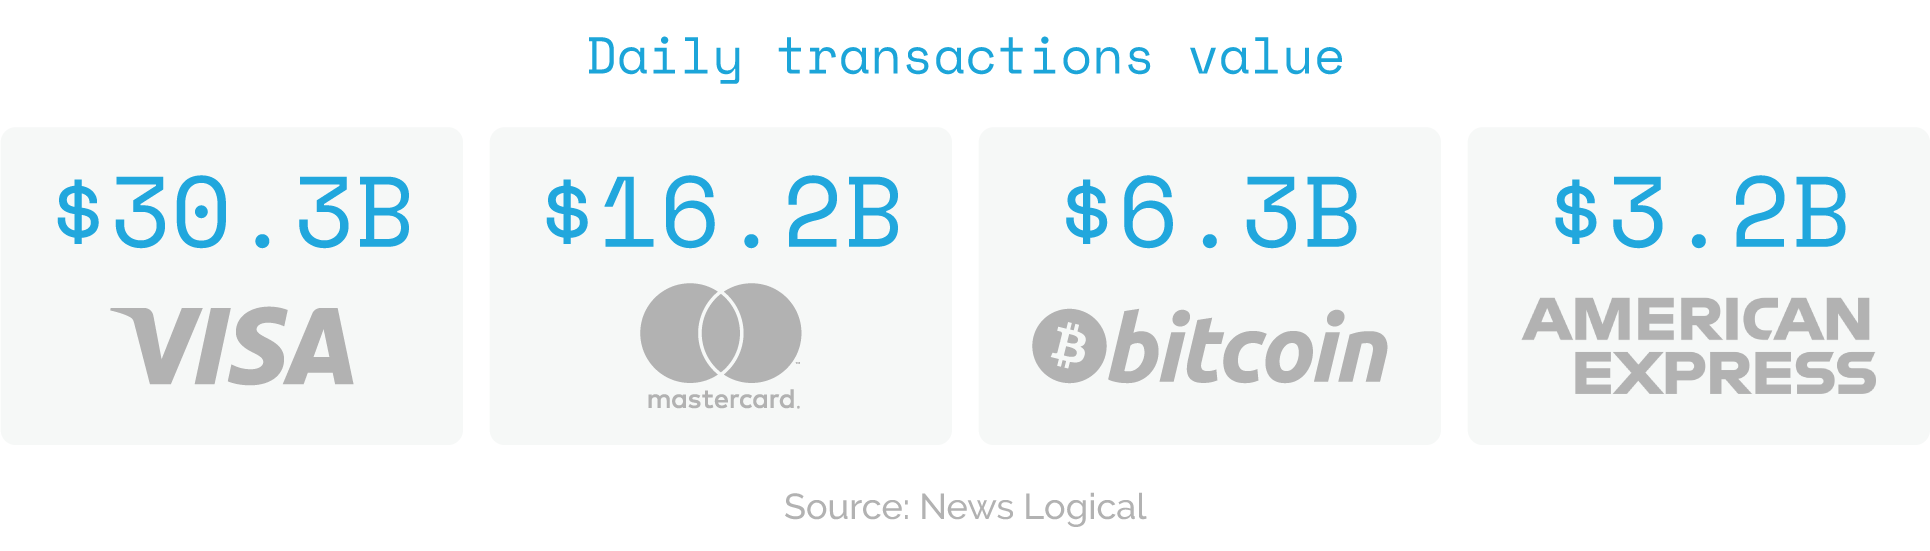 Daily cryptocurrency transaction value